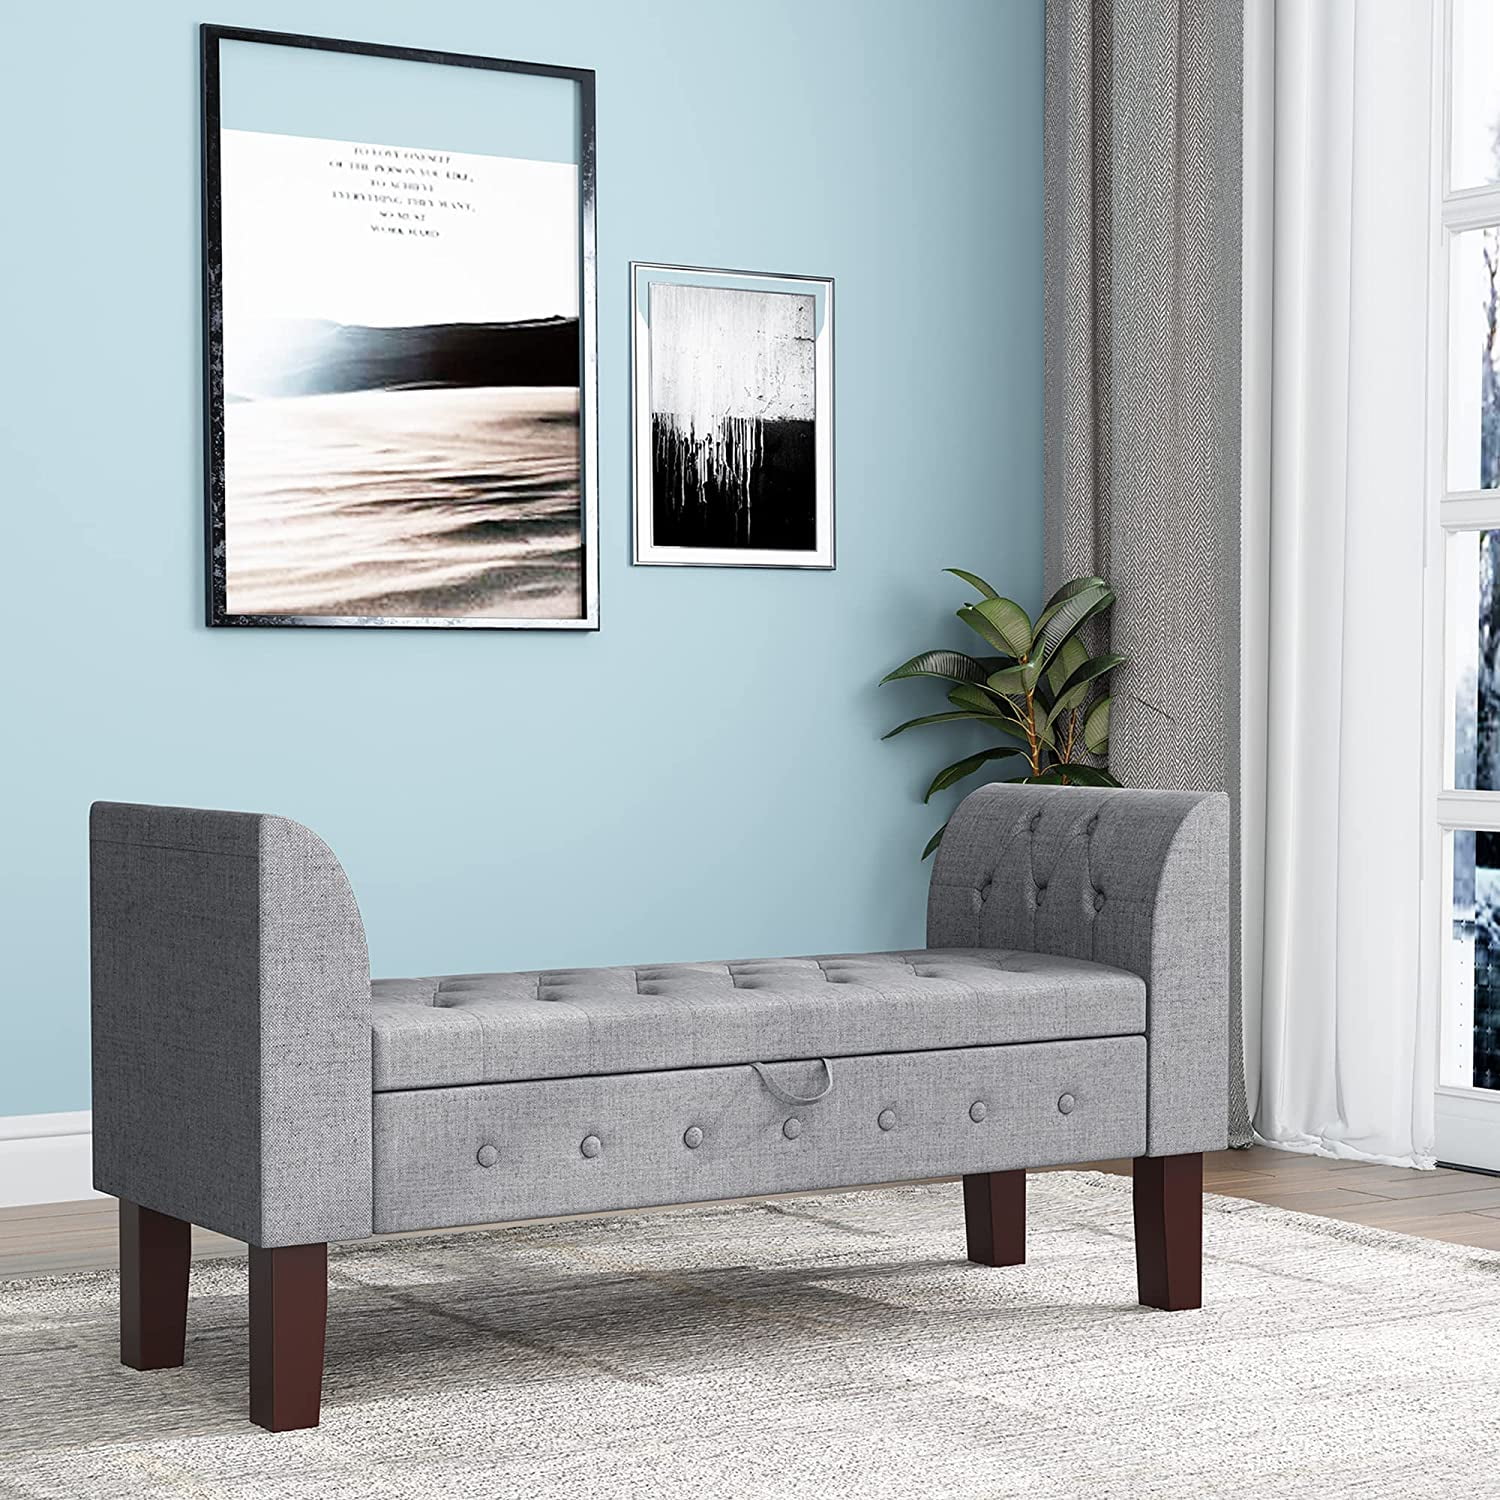 Andeworld Upholstered Storage Bench with Arms Ottoman Bench for Bedroom  Entryway Living Room Khaki